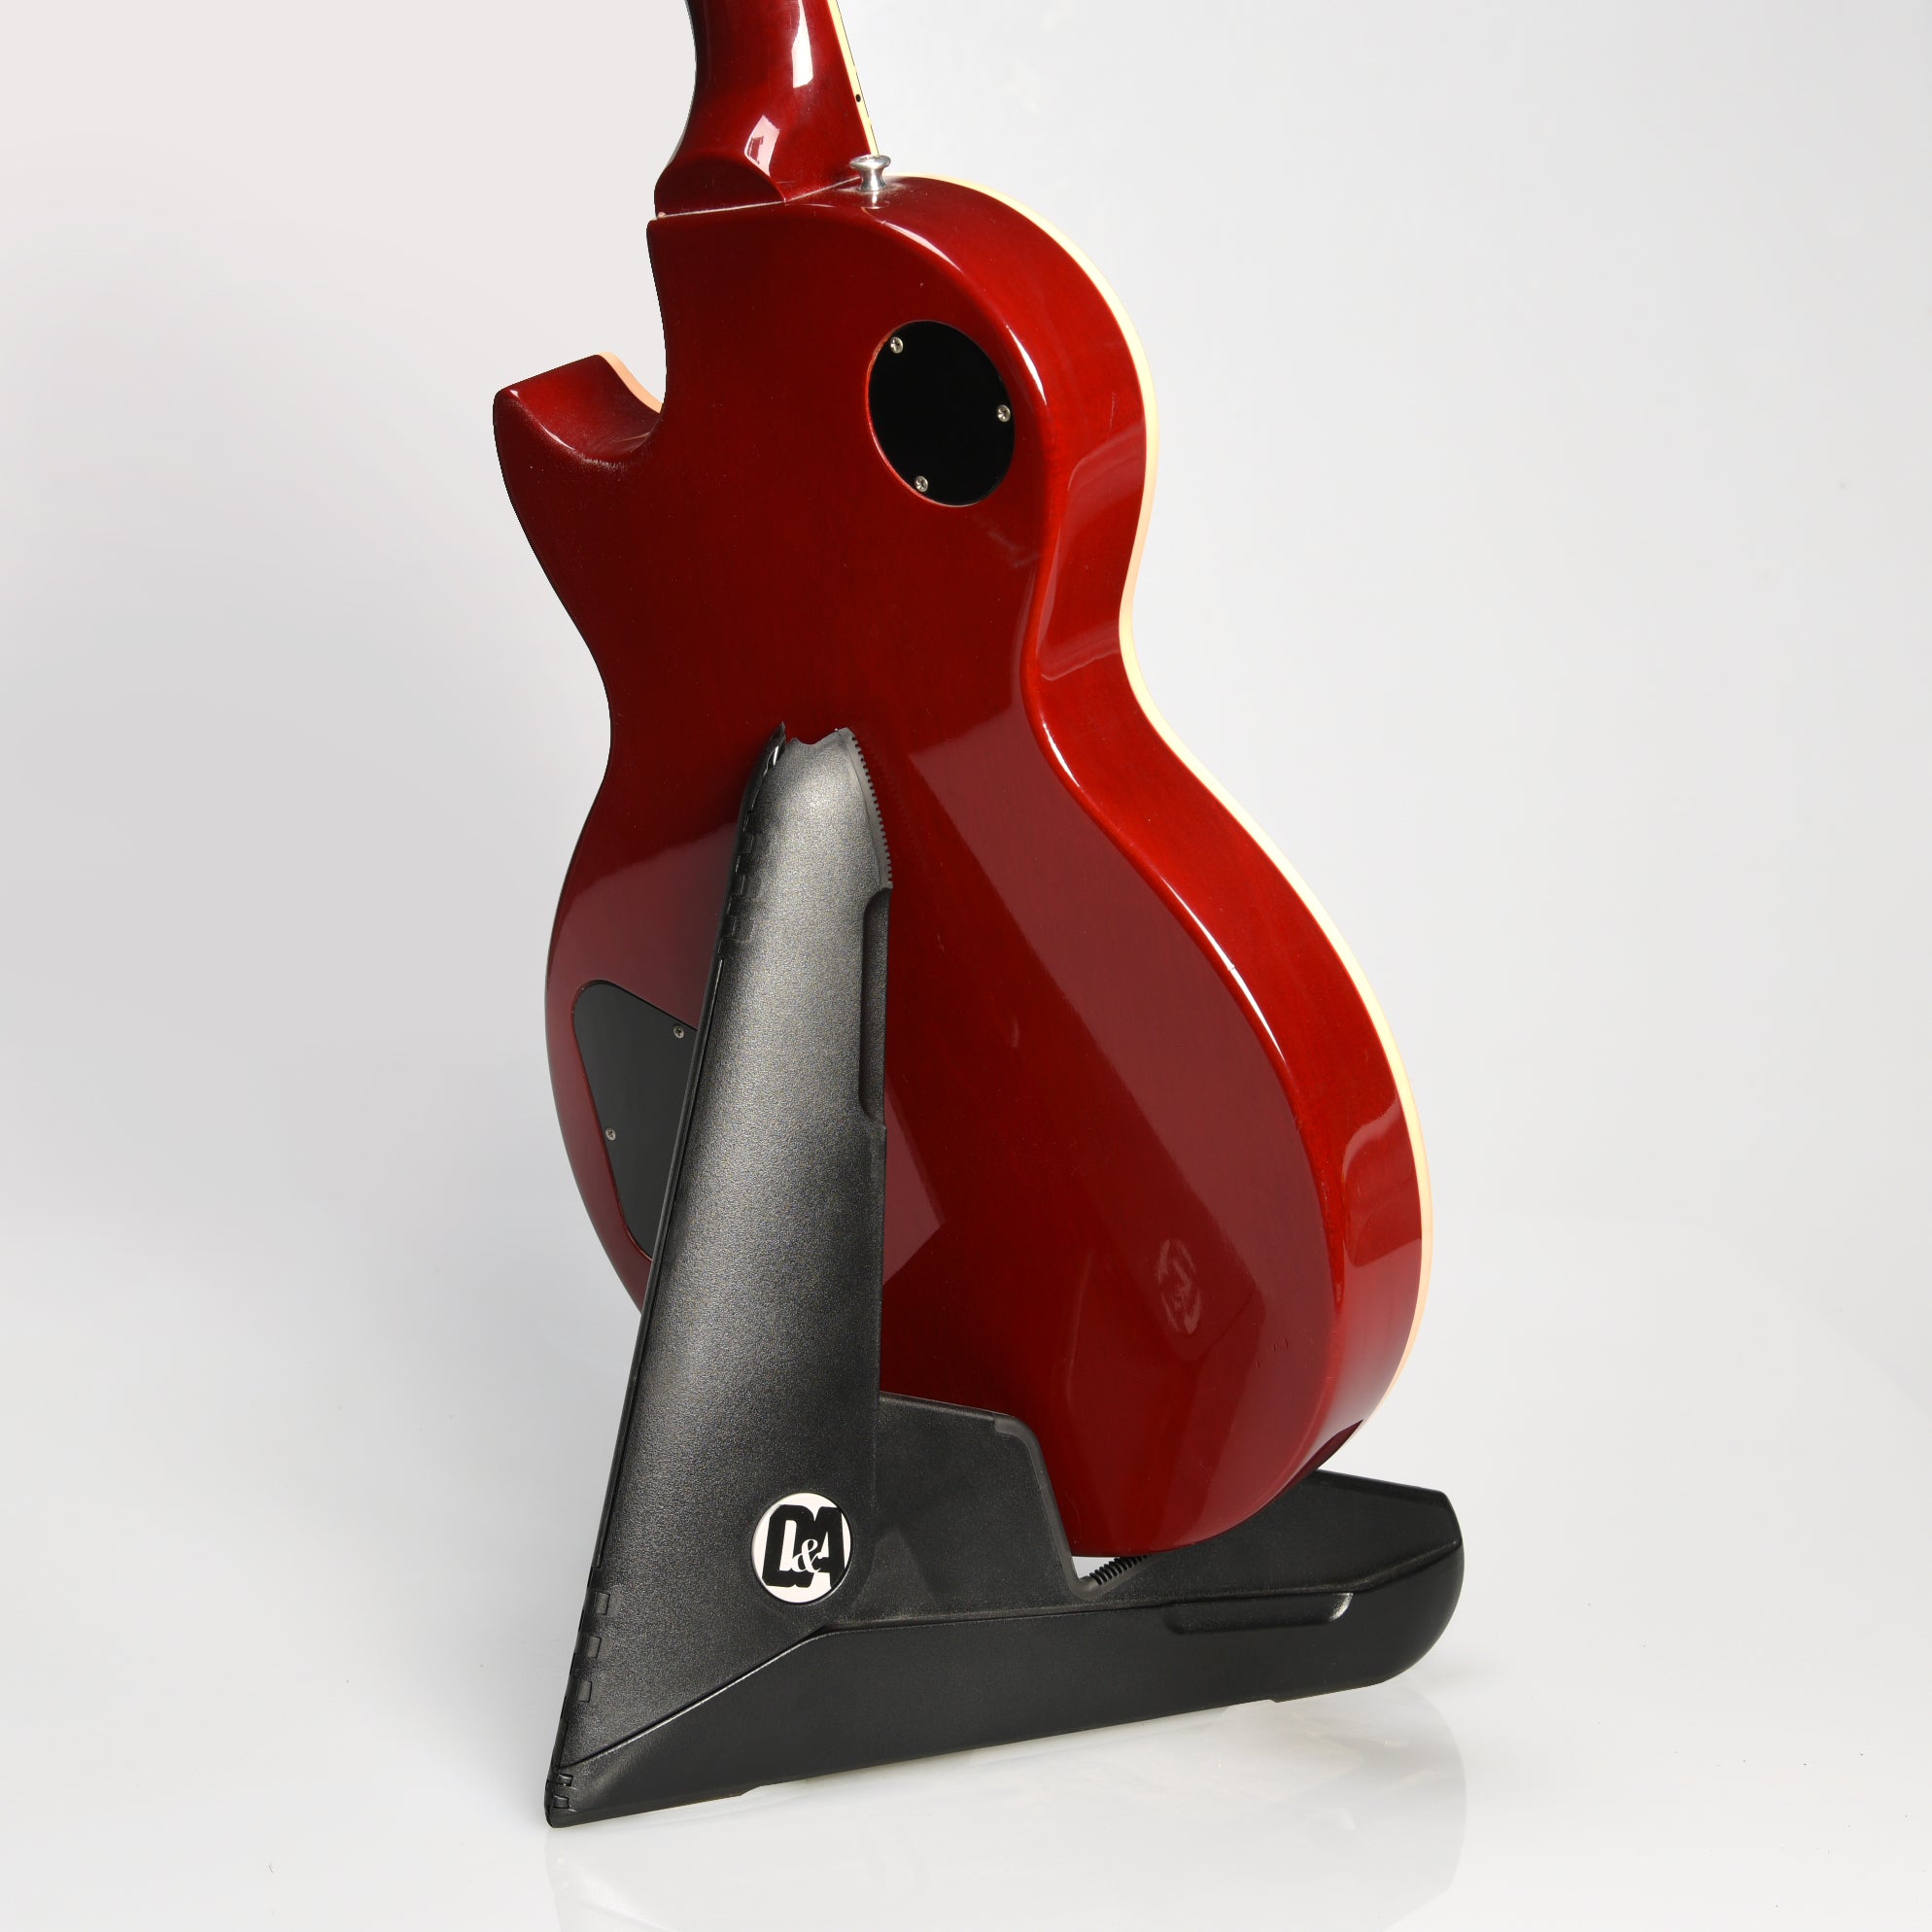 Innovative Guitar Stands, Wall Hangers, and Accessories - D&A 